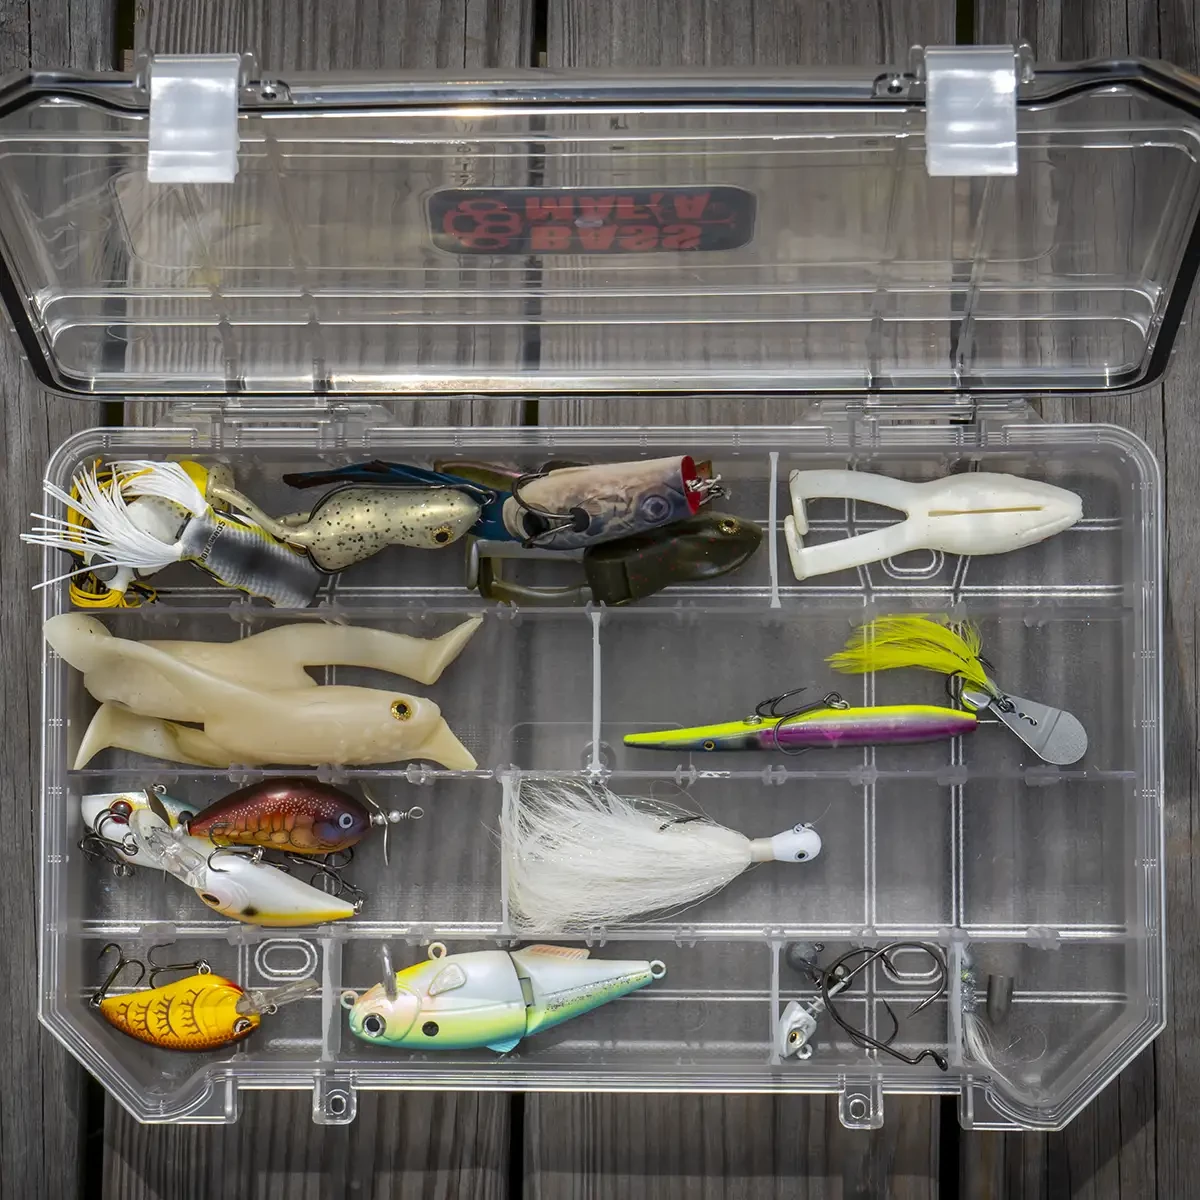 Best Tackle Box and Bag for Fishing & Storage - BC Fishing Journal